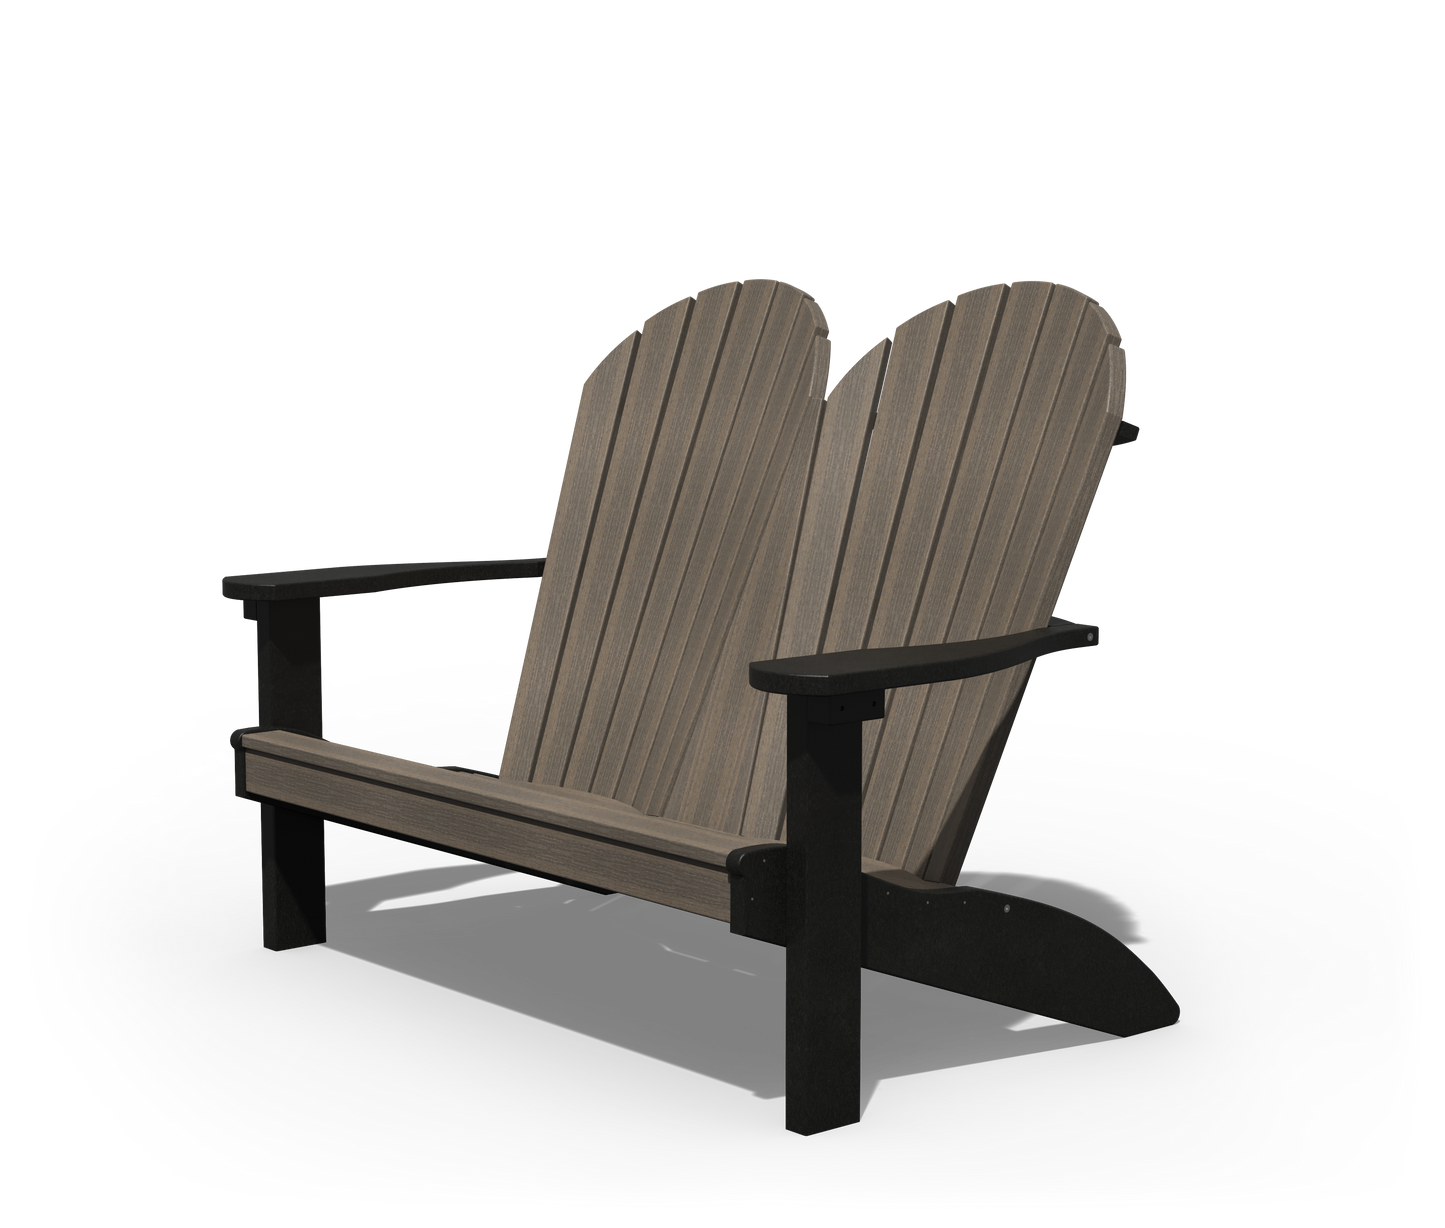 Patiova Recycled Plastic 4' Adirondack Bench - LEAD TIME TO SHIP 3 WEEKS